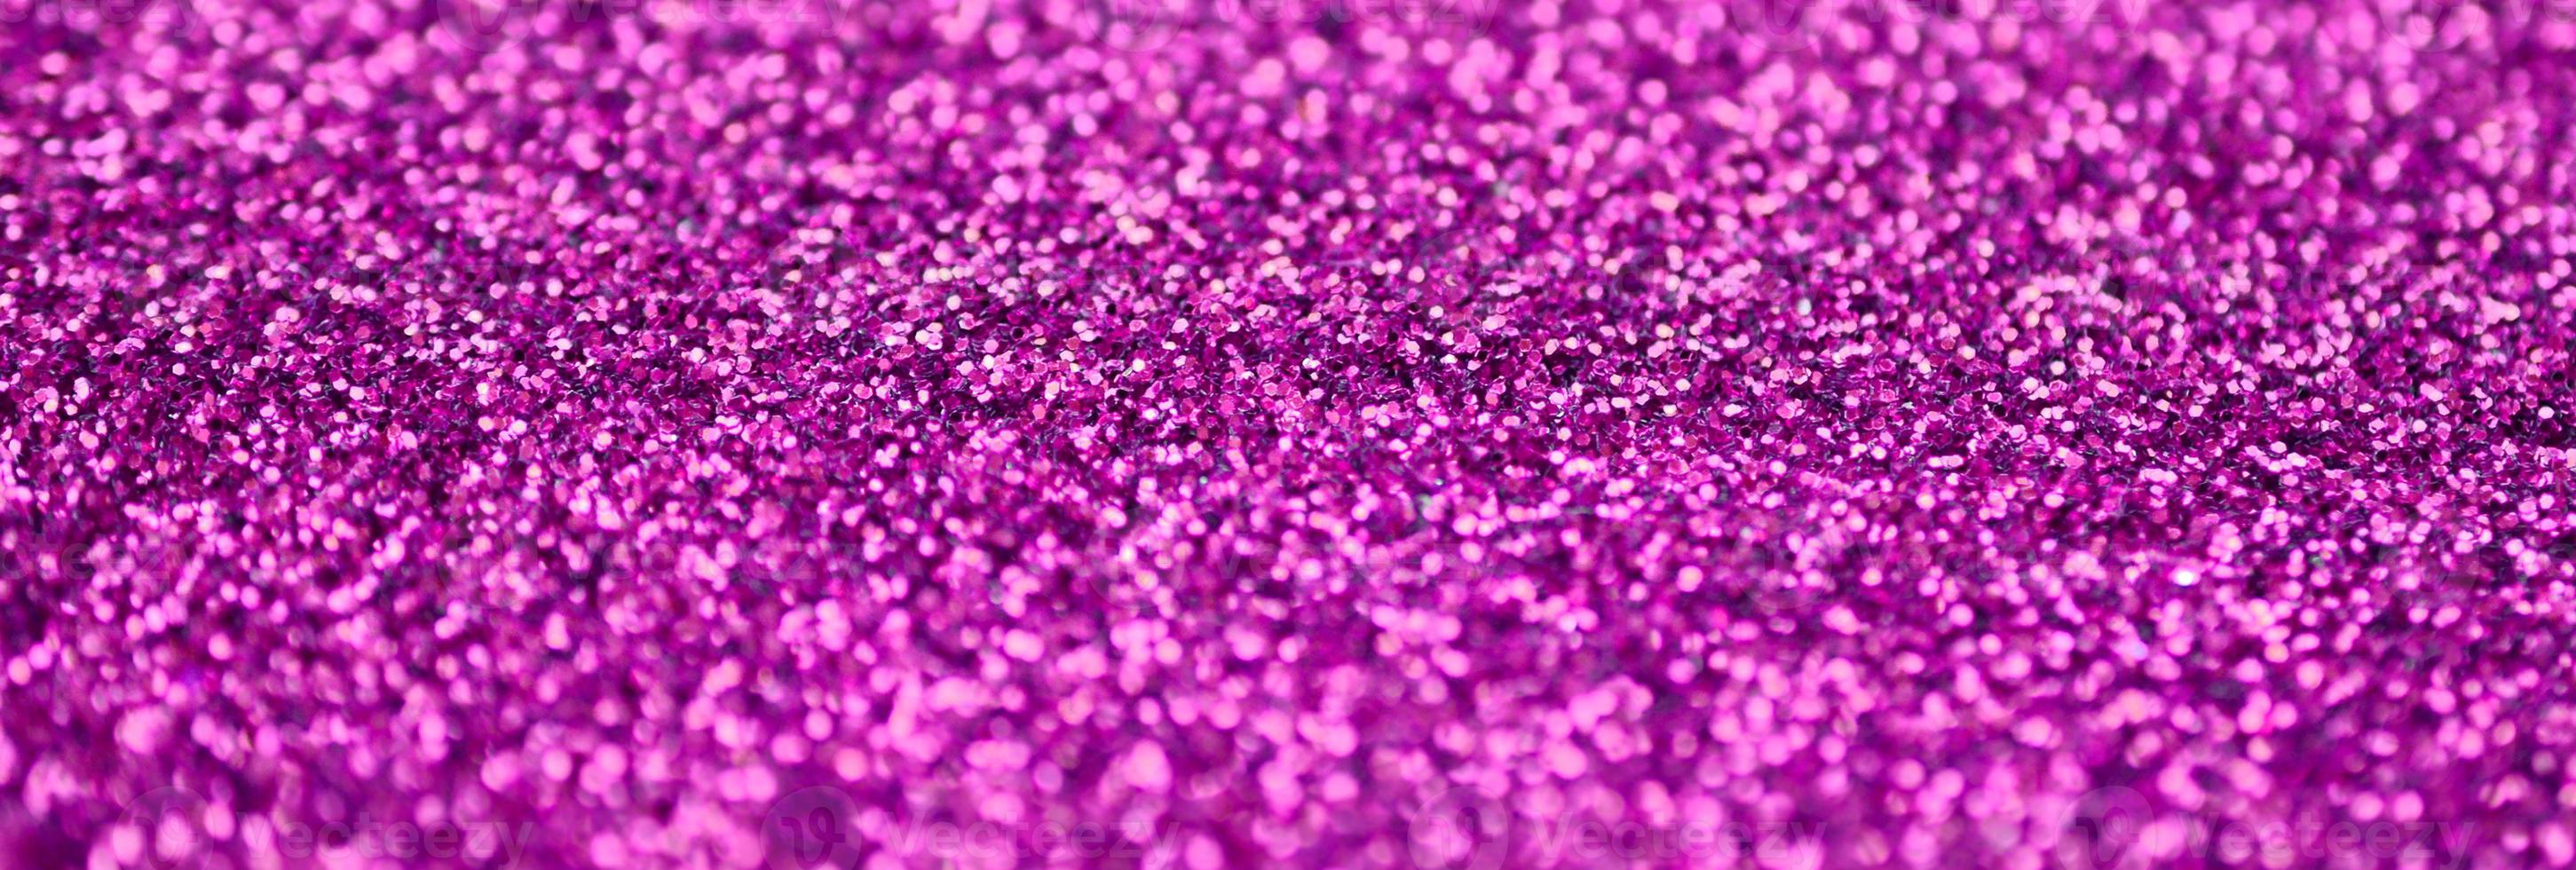 Pink decorative sequins. Background image with shiny bokeh lights from small elements photo